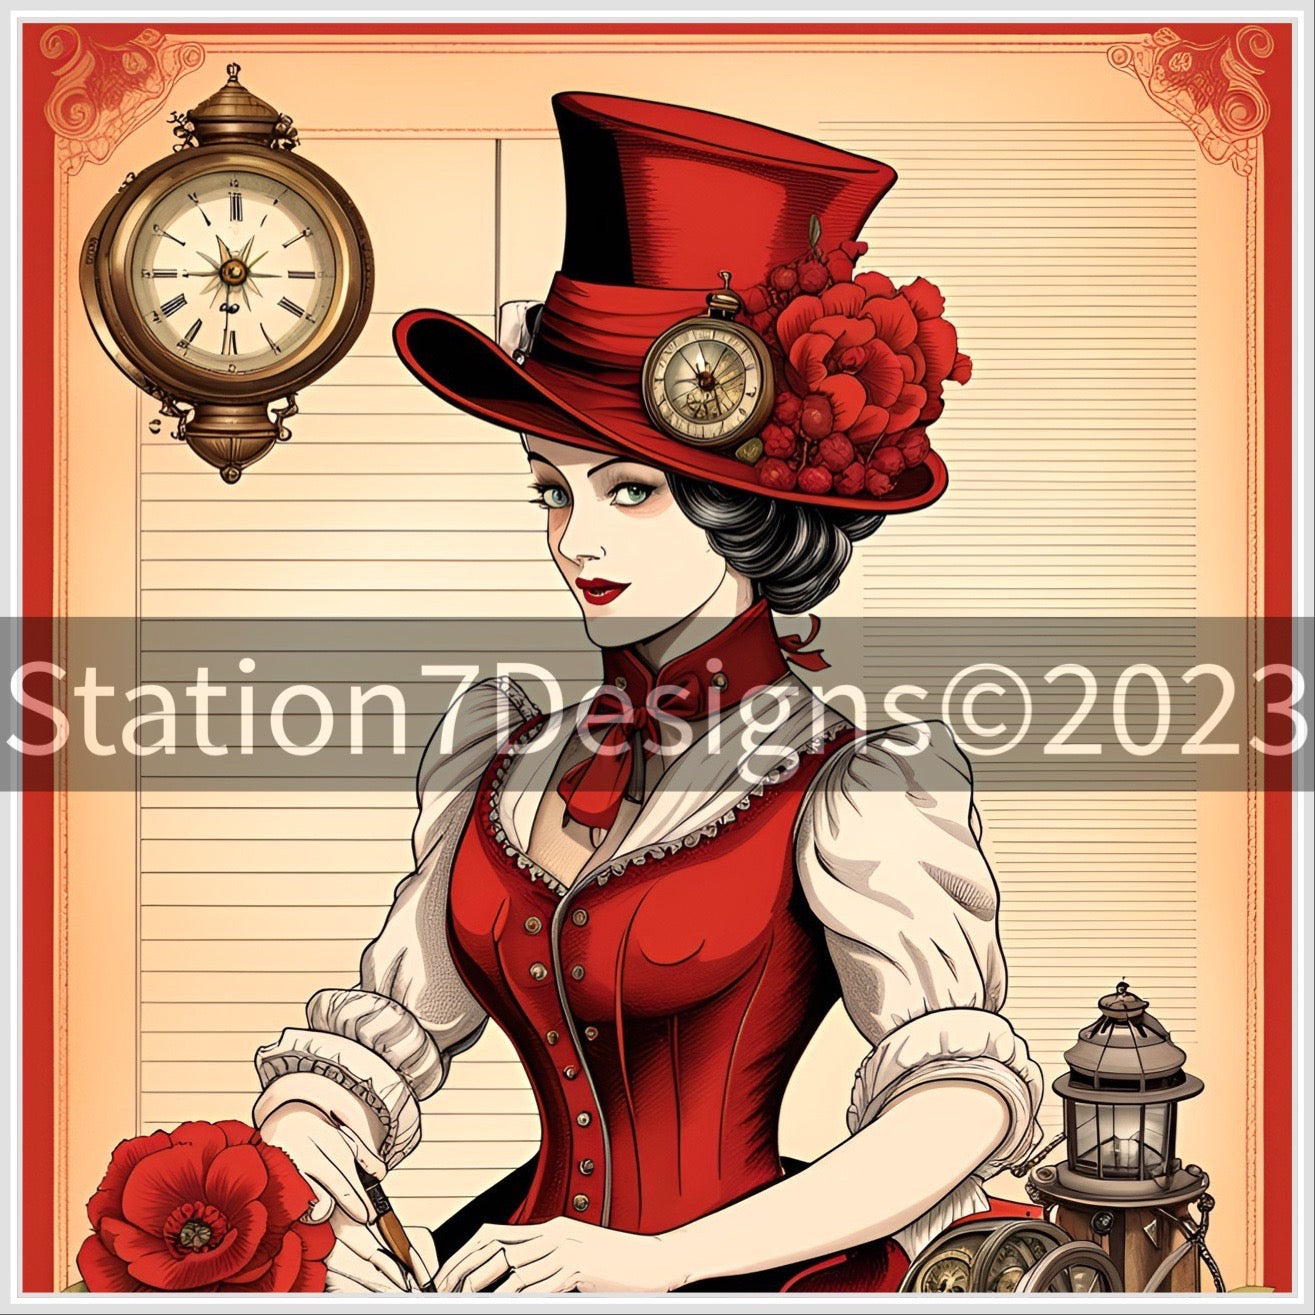 “Women Of The Steam Age” Black & Red Steampunk Junk Journal Stationery Page Set Of 25 Prints On Recycled Linen Paper